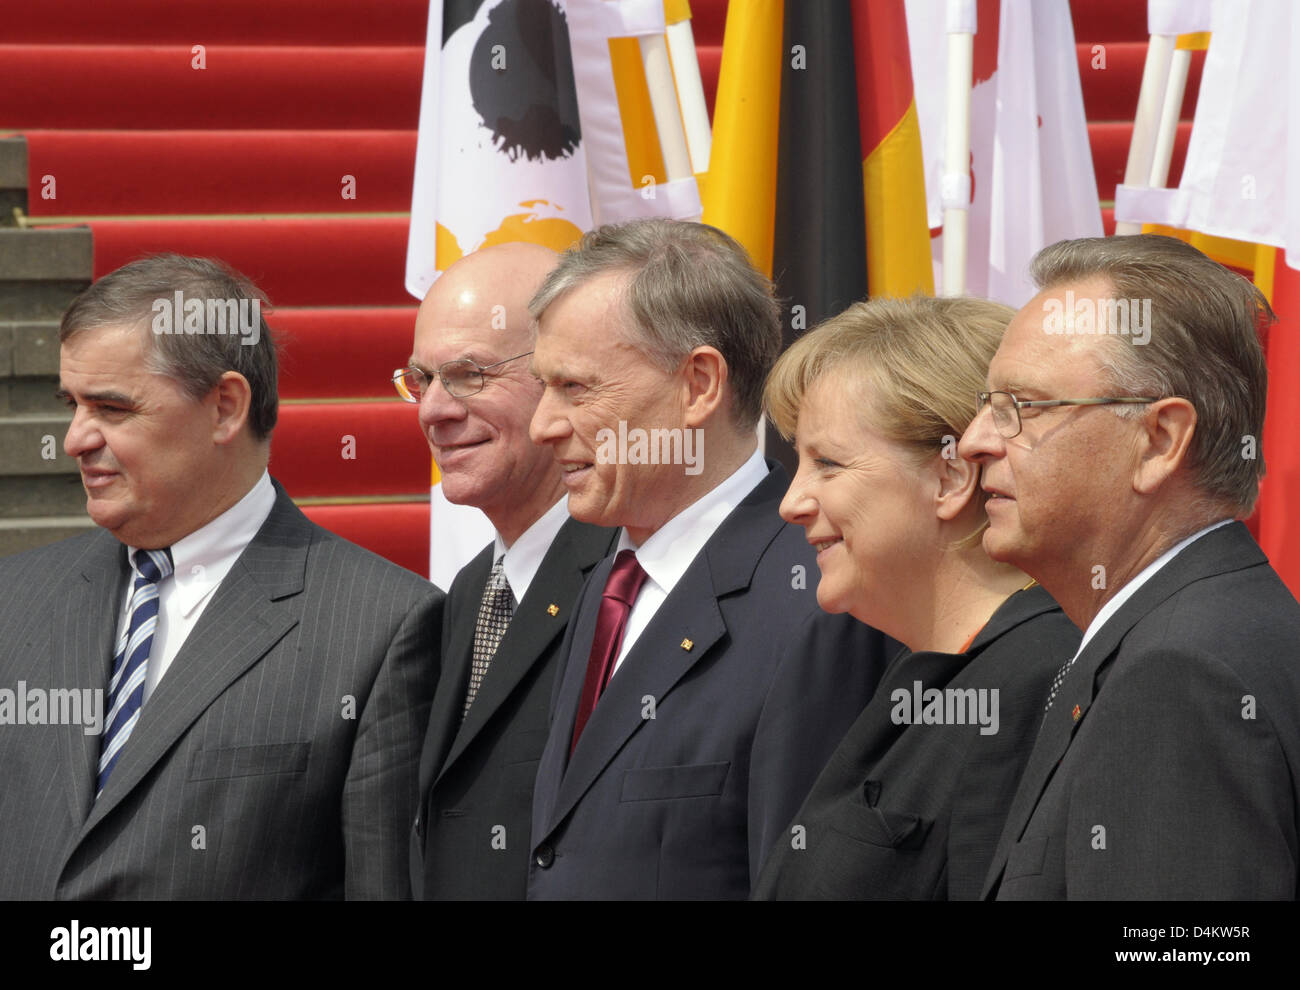 Peter Mueller (CDU, L-R), President of the Bundesrat, Norbert Lammert (CDU), President of the Bundestag, German Federal President Horst Koehler, German Chancellor Angela Merkel (CDU) and Hans-Juergen Papier, President of the Federal Constitutional Court, stand next to each other on the ?Gendarmenmarkt? in Berlin, Germany, 22 May 2009. The 60-years-existence of the Federal Republic  Stock Photo